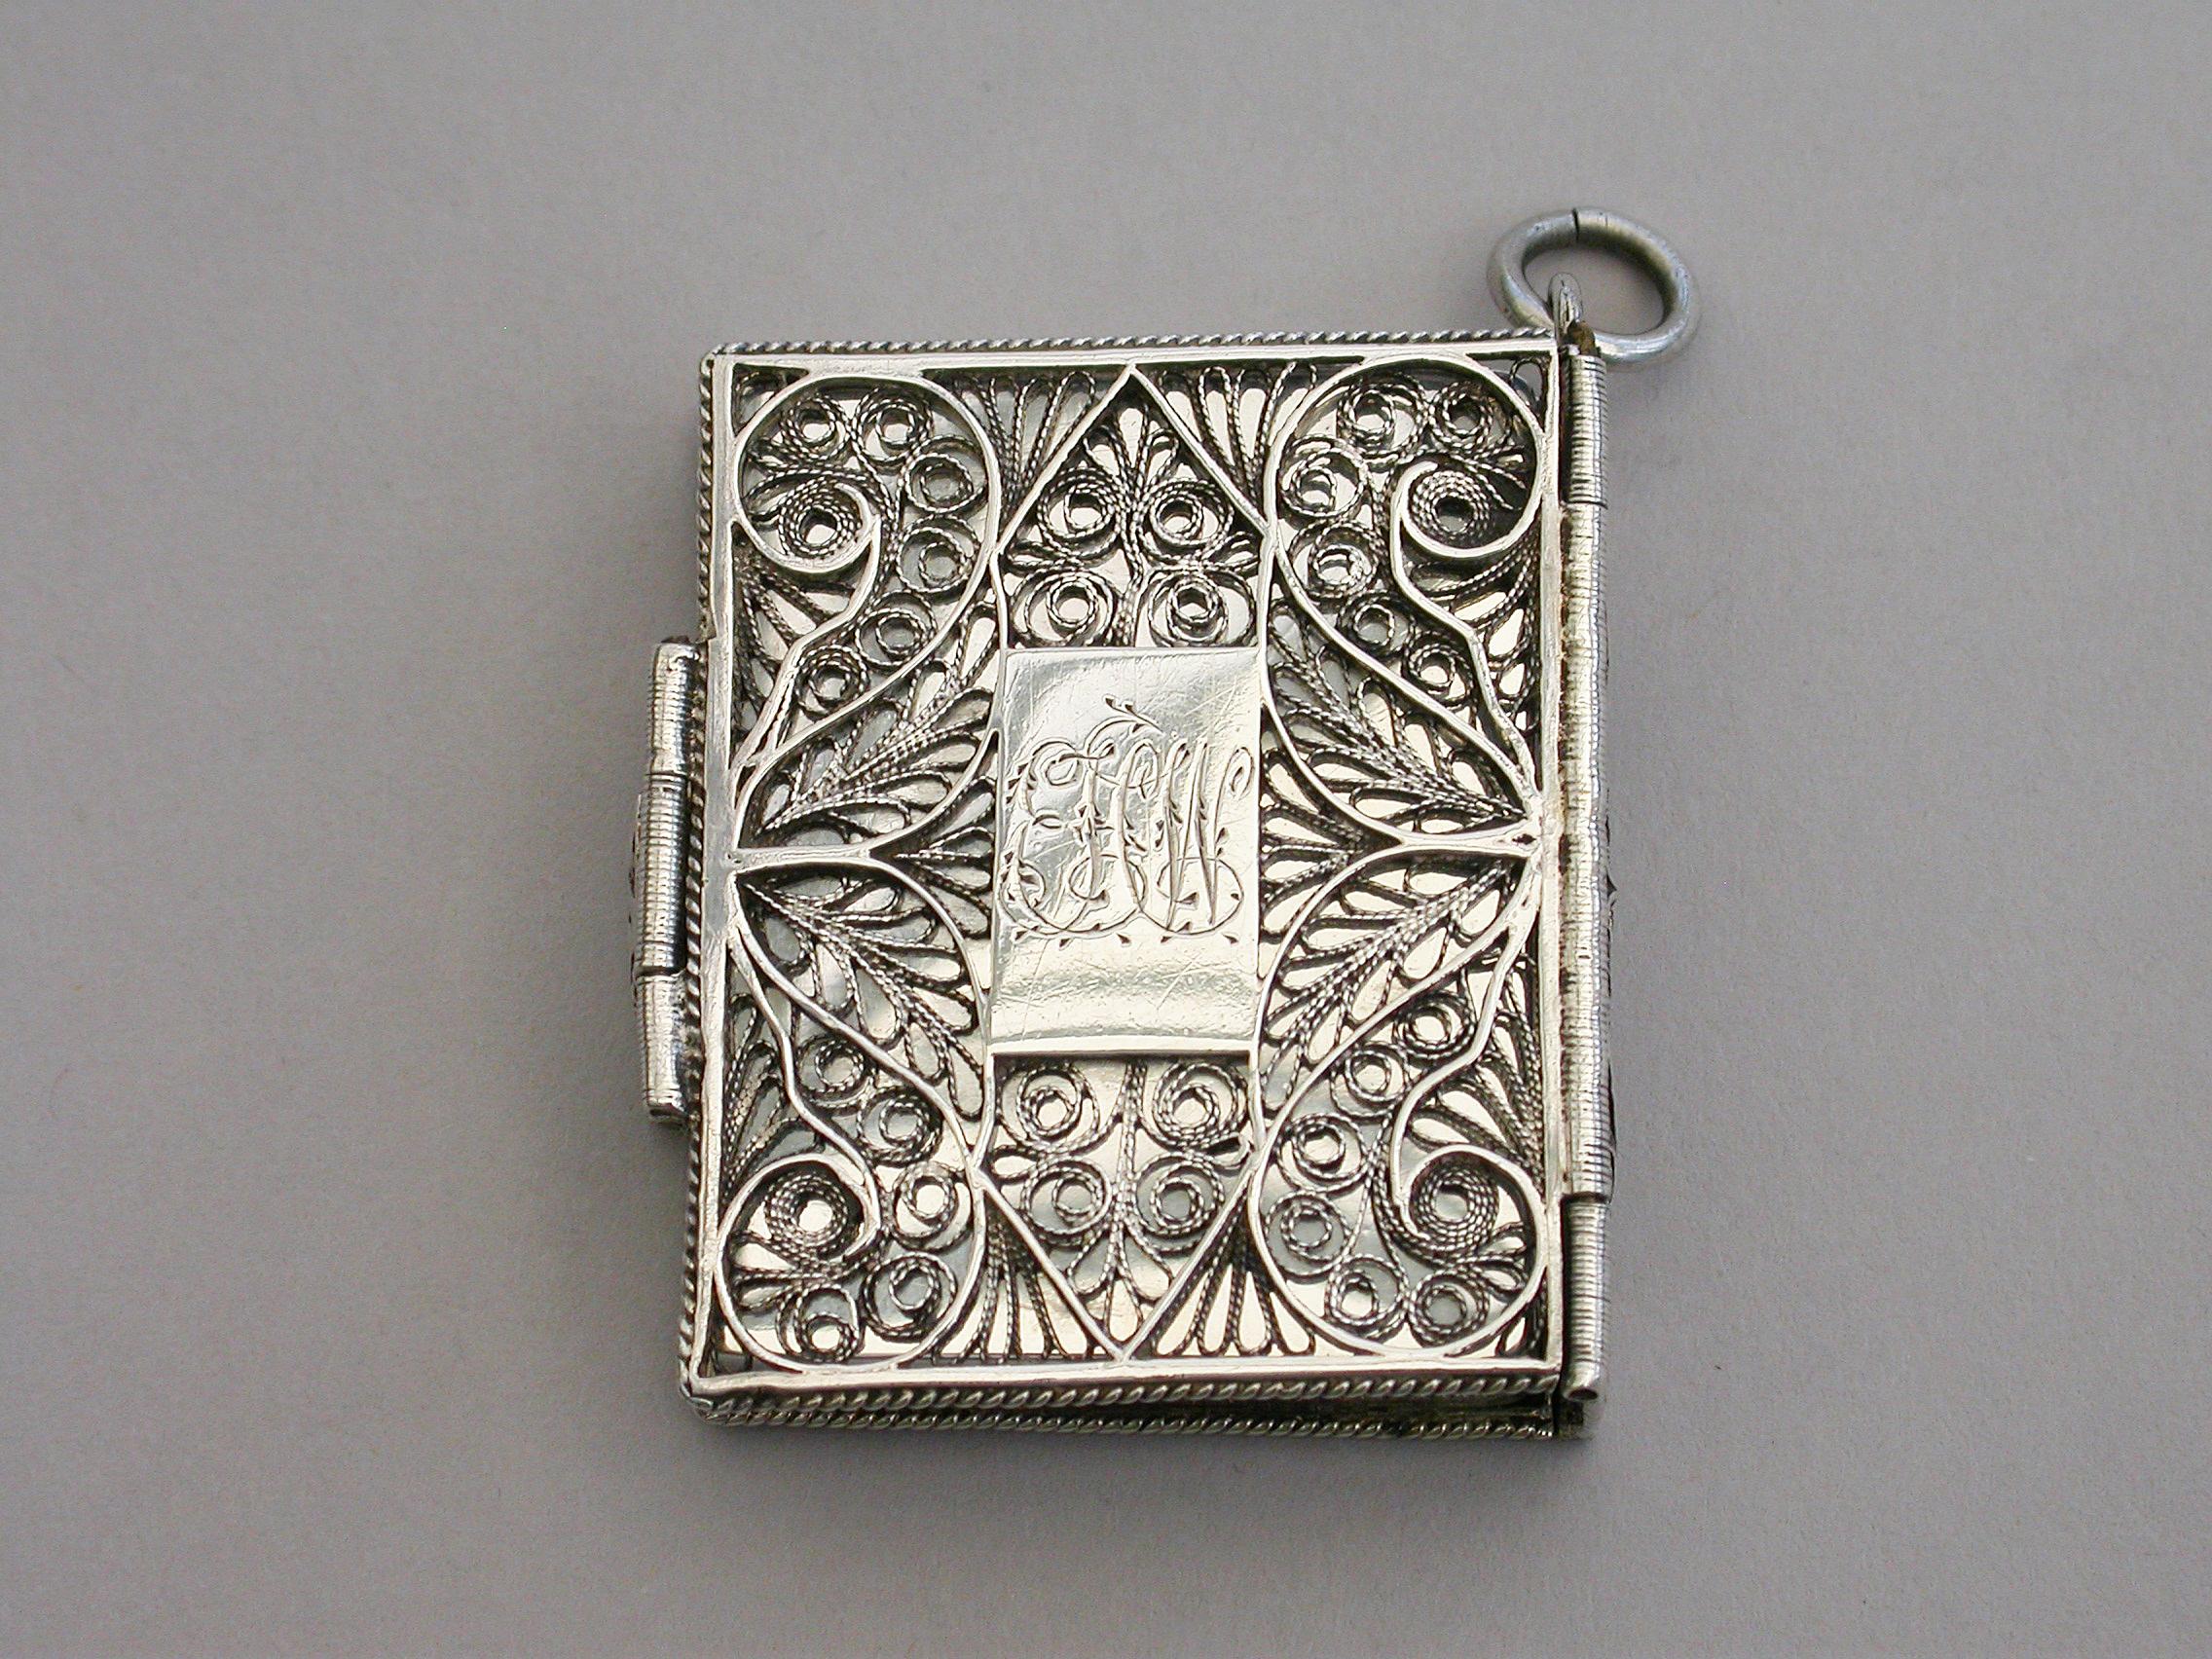 A very rare Victorian silver Vinaigrette made in the form of a family bible with clasp and suspension ring, the Vinaigrette itself with plain surfaces, the outer covers of filigree work with central plaques. The silver gilt grille pierced with